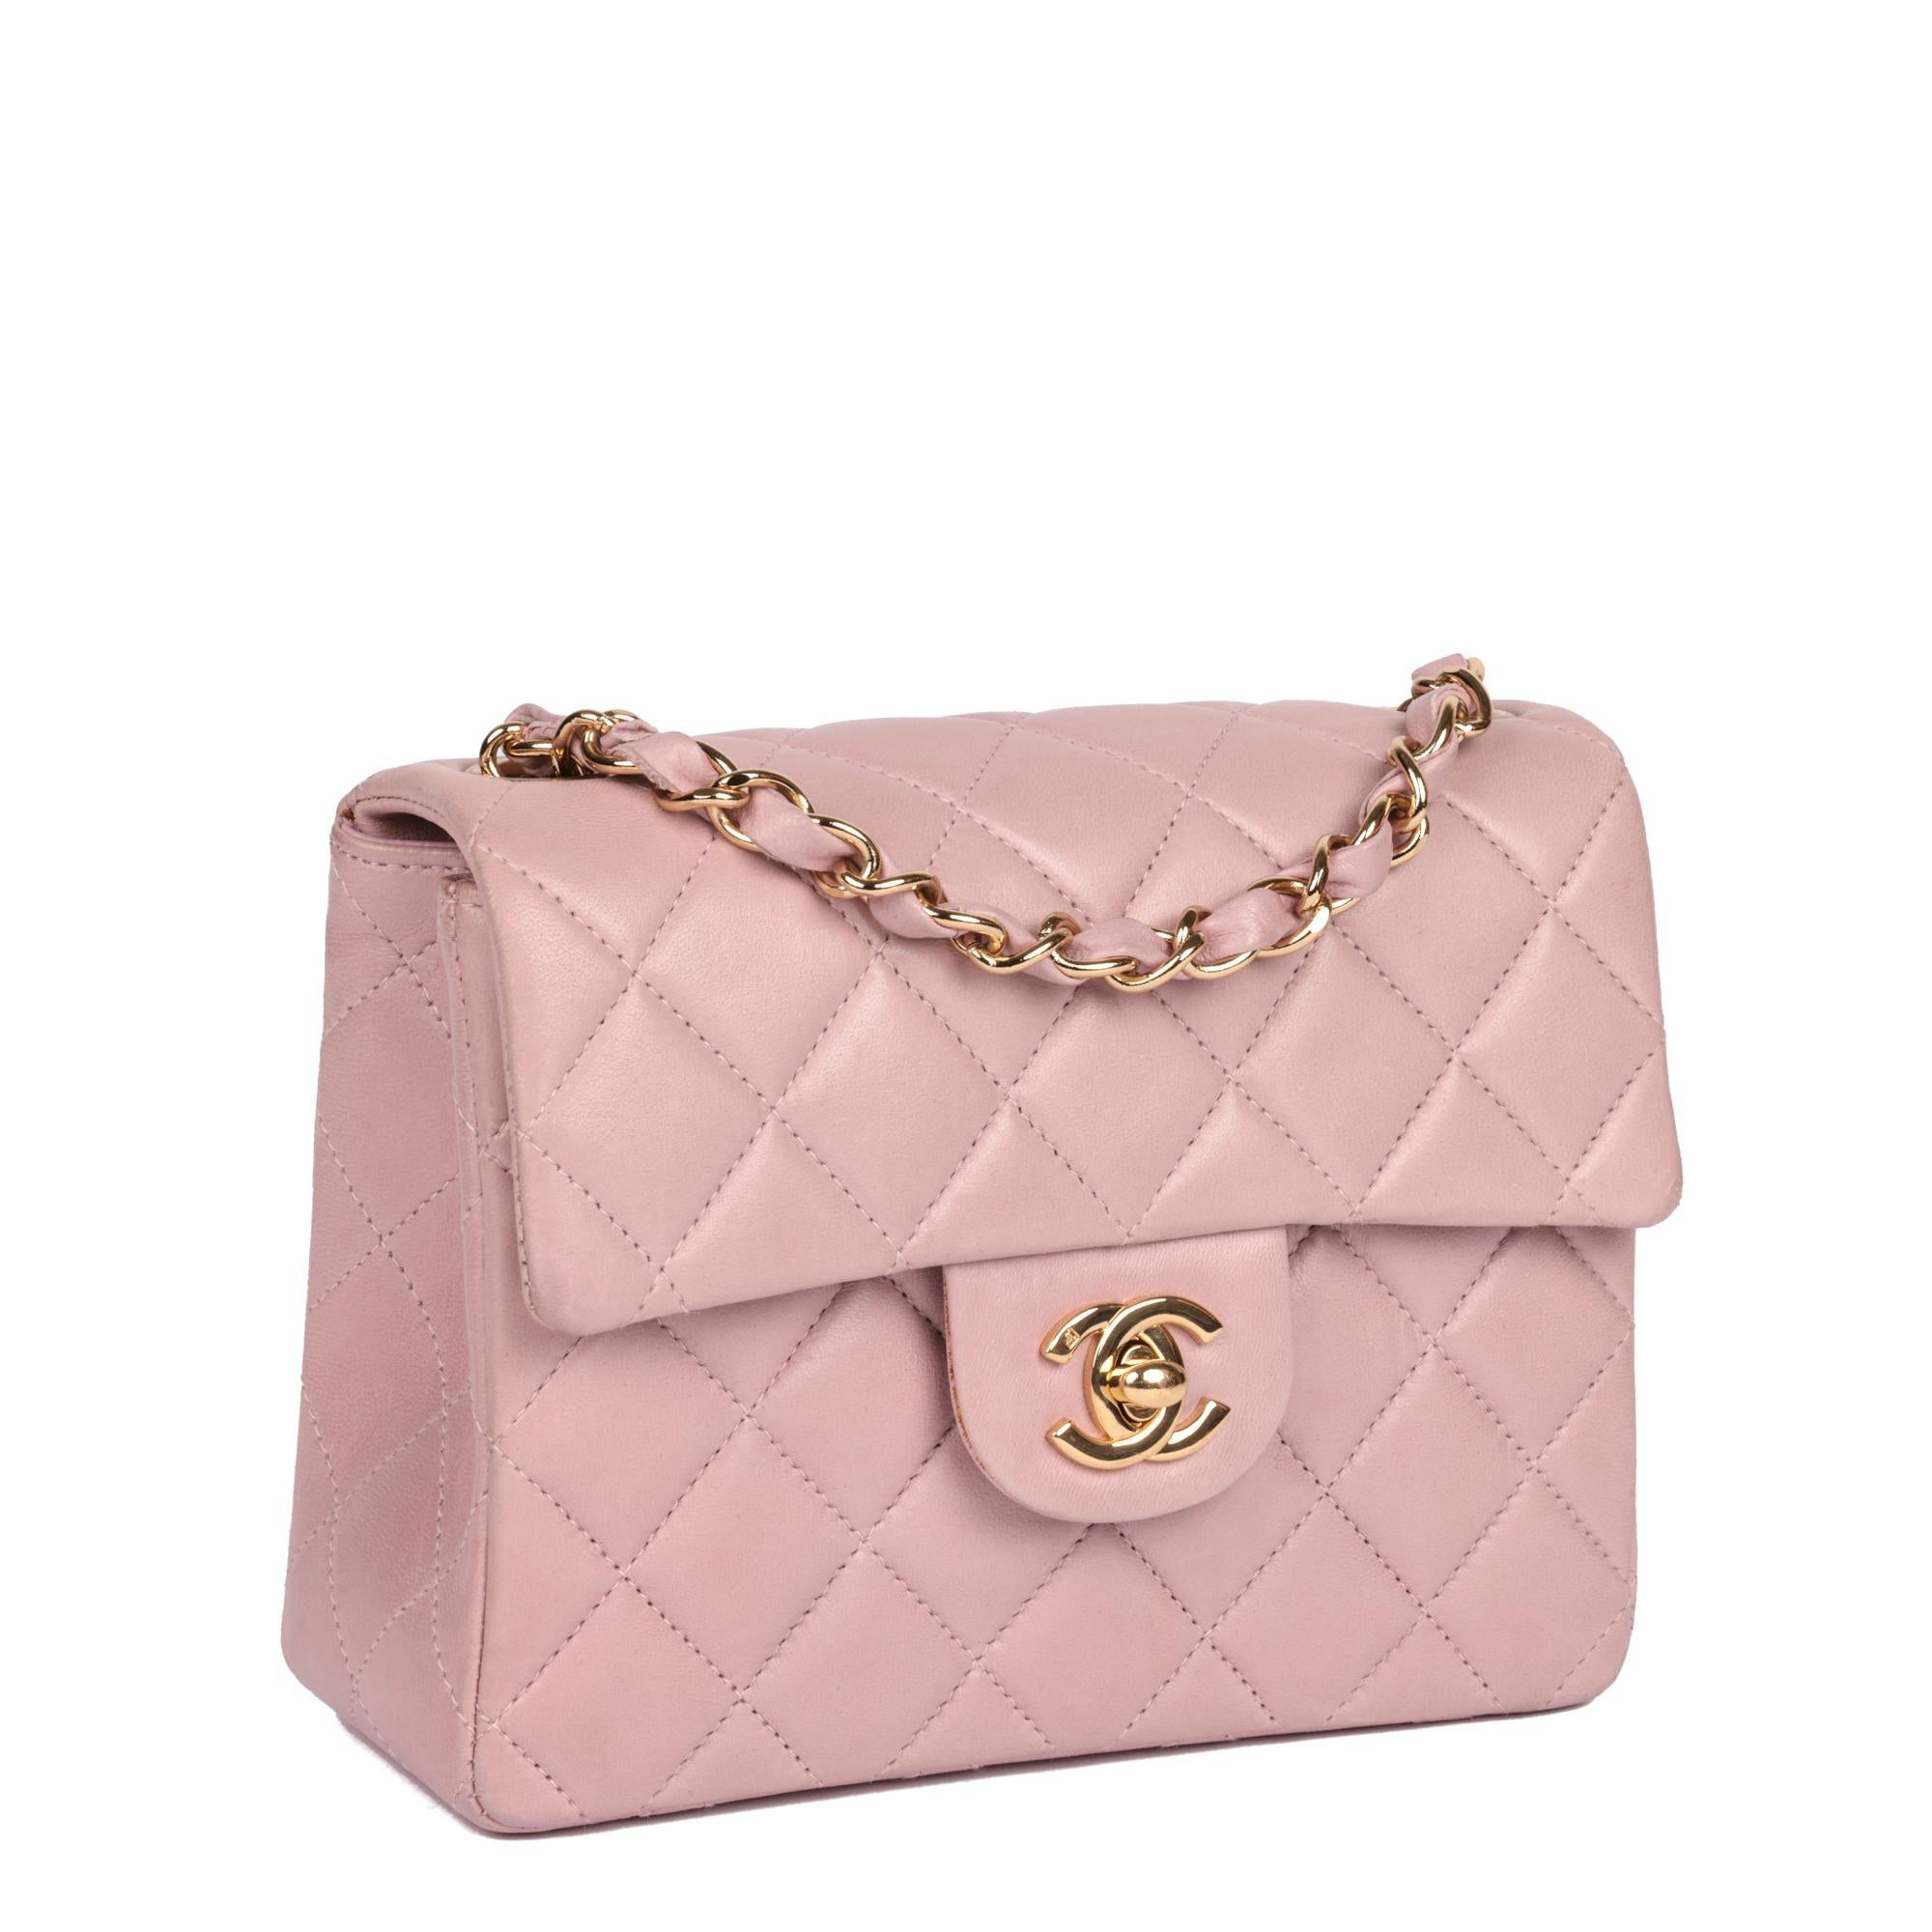 CHANEL
Pink Quilted Lambskin Vintage Square Mini Flap Bag

Xupes Reference: HB5198
Serial Number: 6963366
Age (Circa): 2000
Accompanied By: Chanel Dust Bag, Box, Authenticity Card
Authenticity Details: Authenticity Card, Serial Sticker (Made in